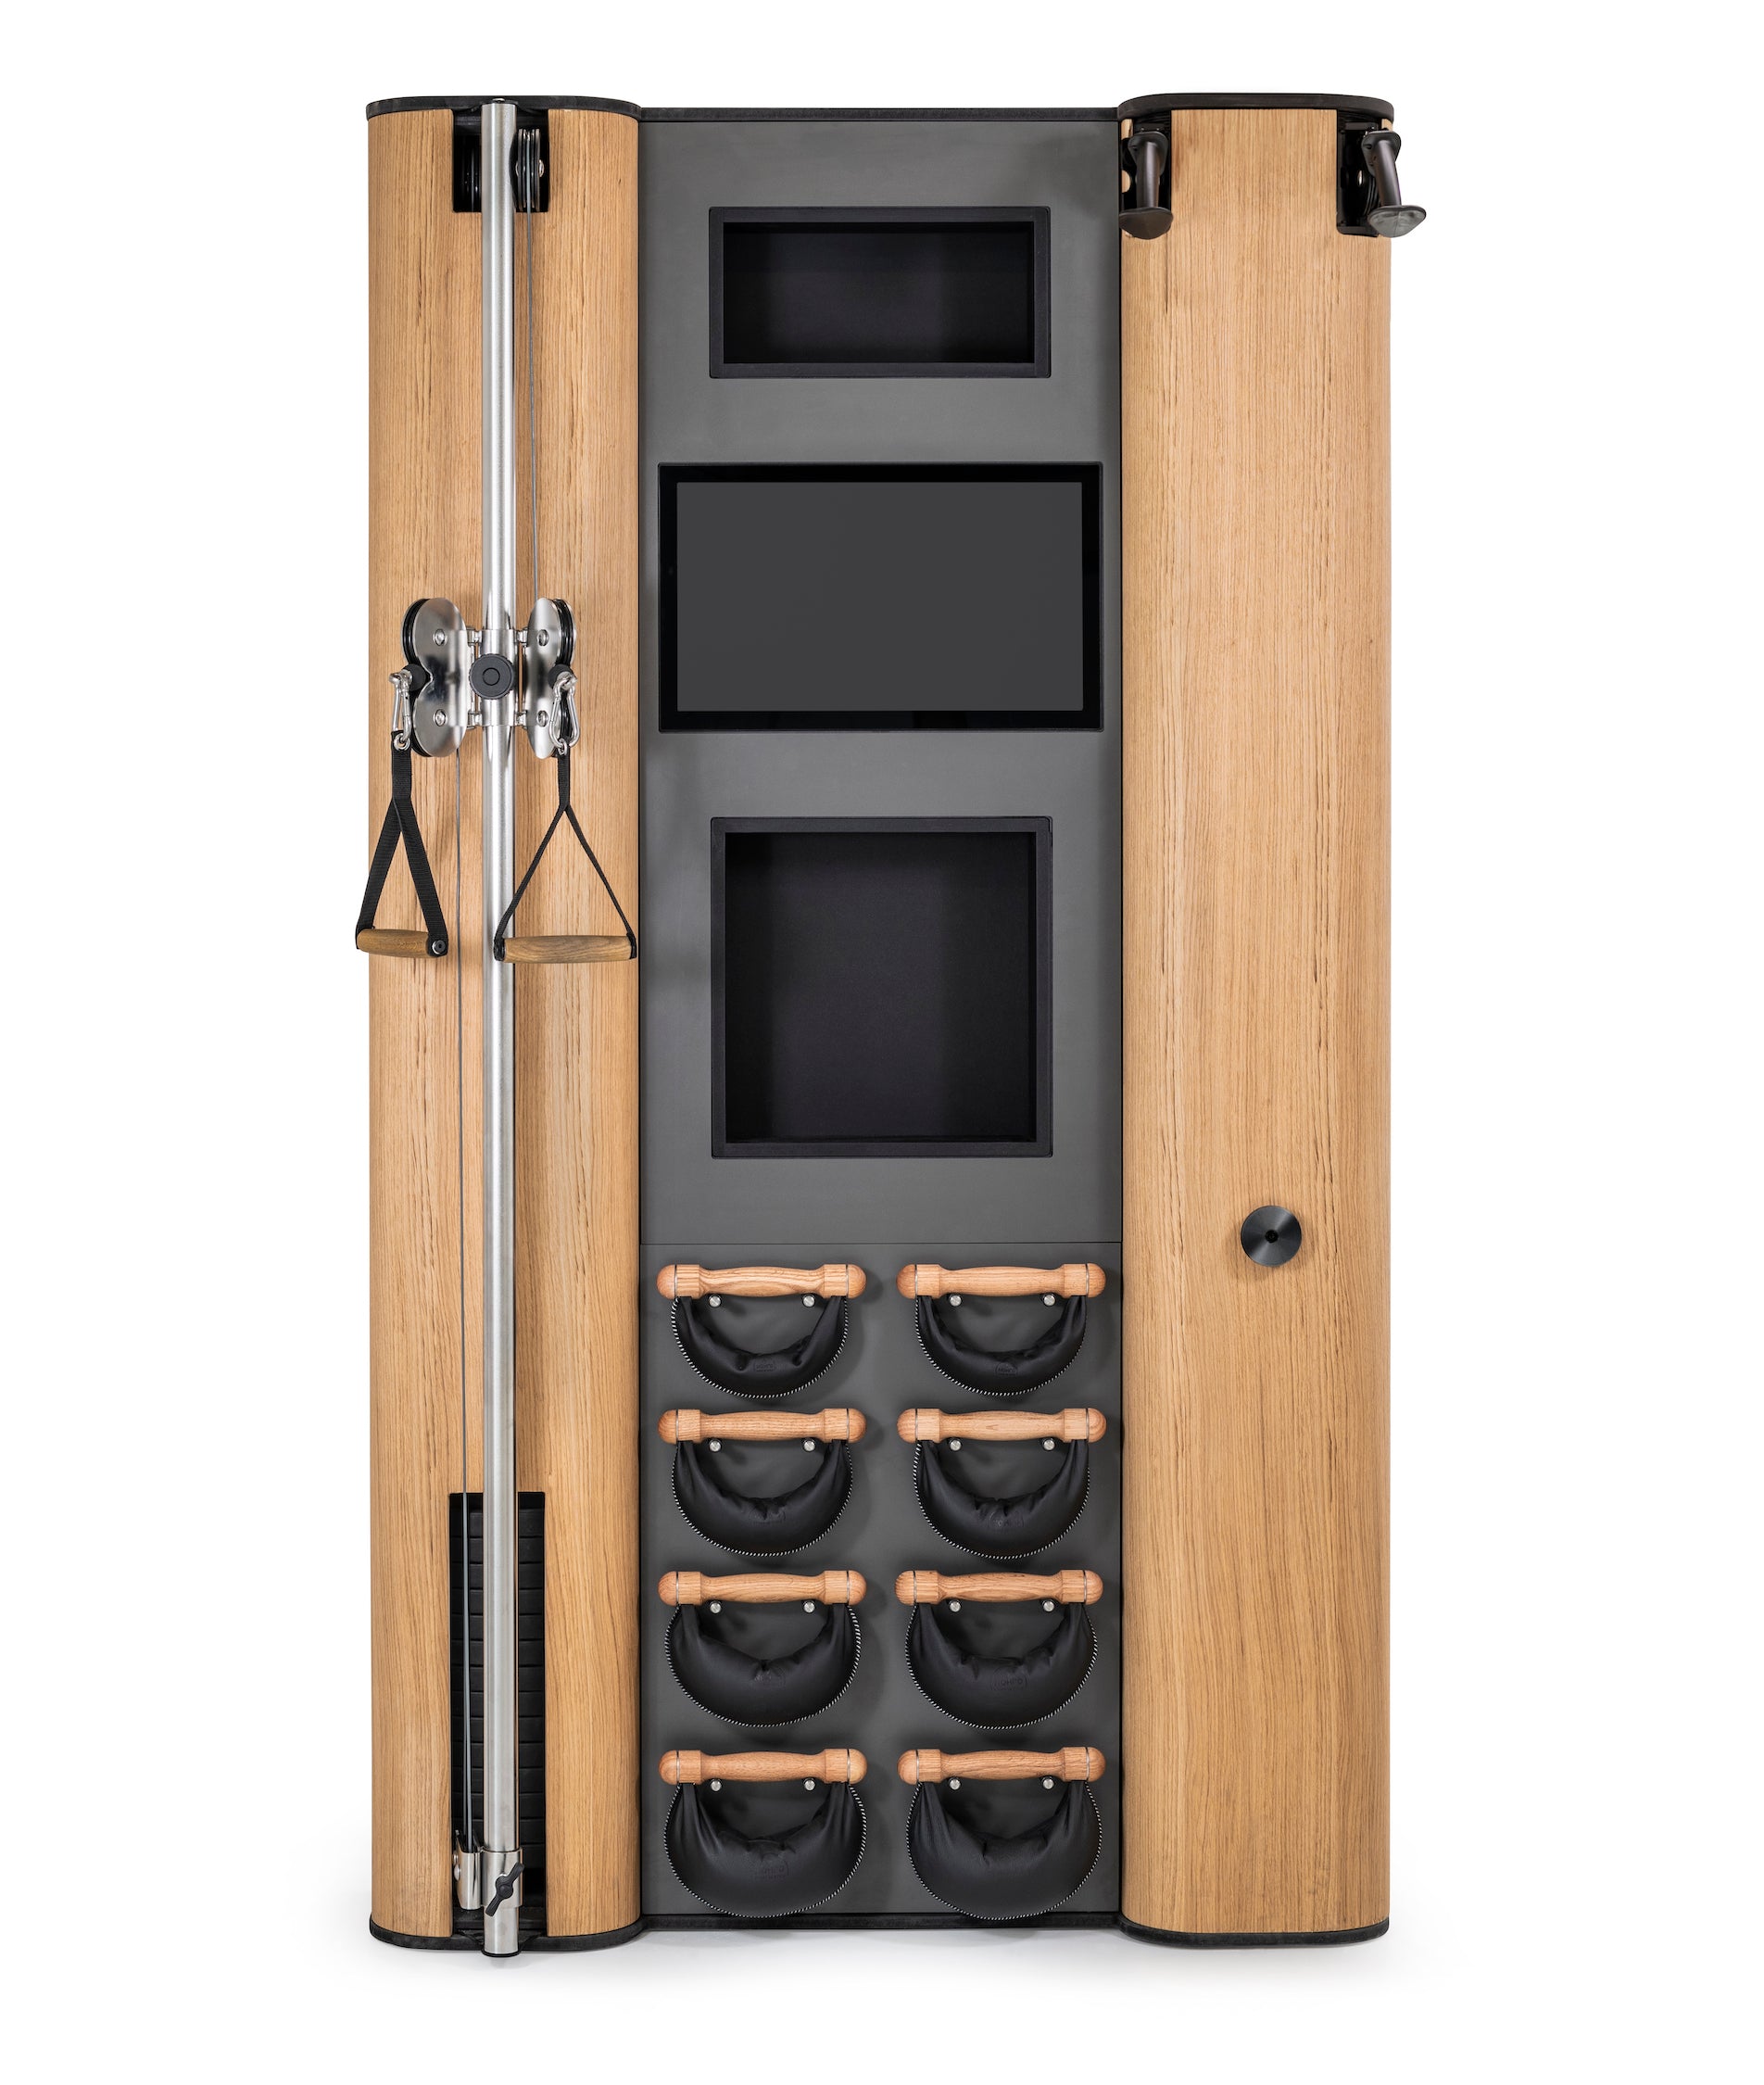 NOHrD Wall Compact - All-in-One Exercise Wall. A sleek, modern fitness wall with adjustable cable machine, cross country ski trainer, and swing weights. Compact design with dimensions of 122 x 32.5cm.